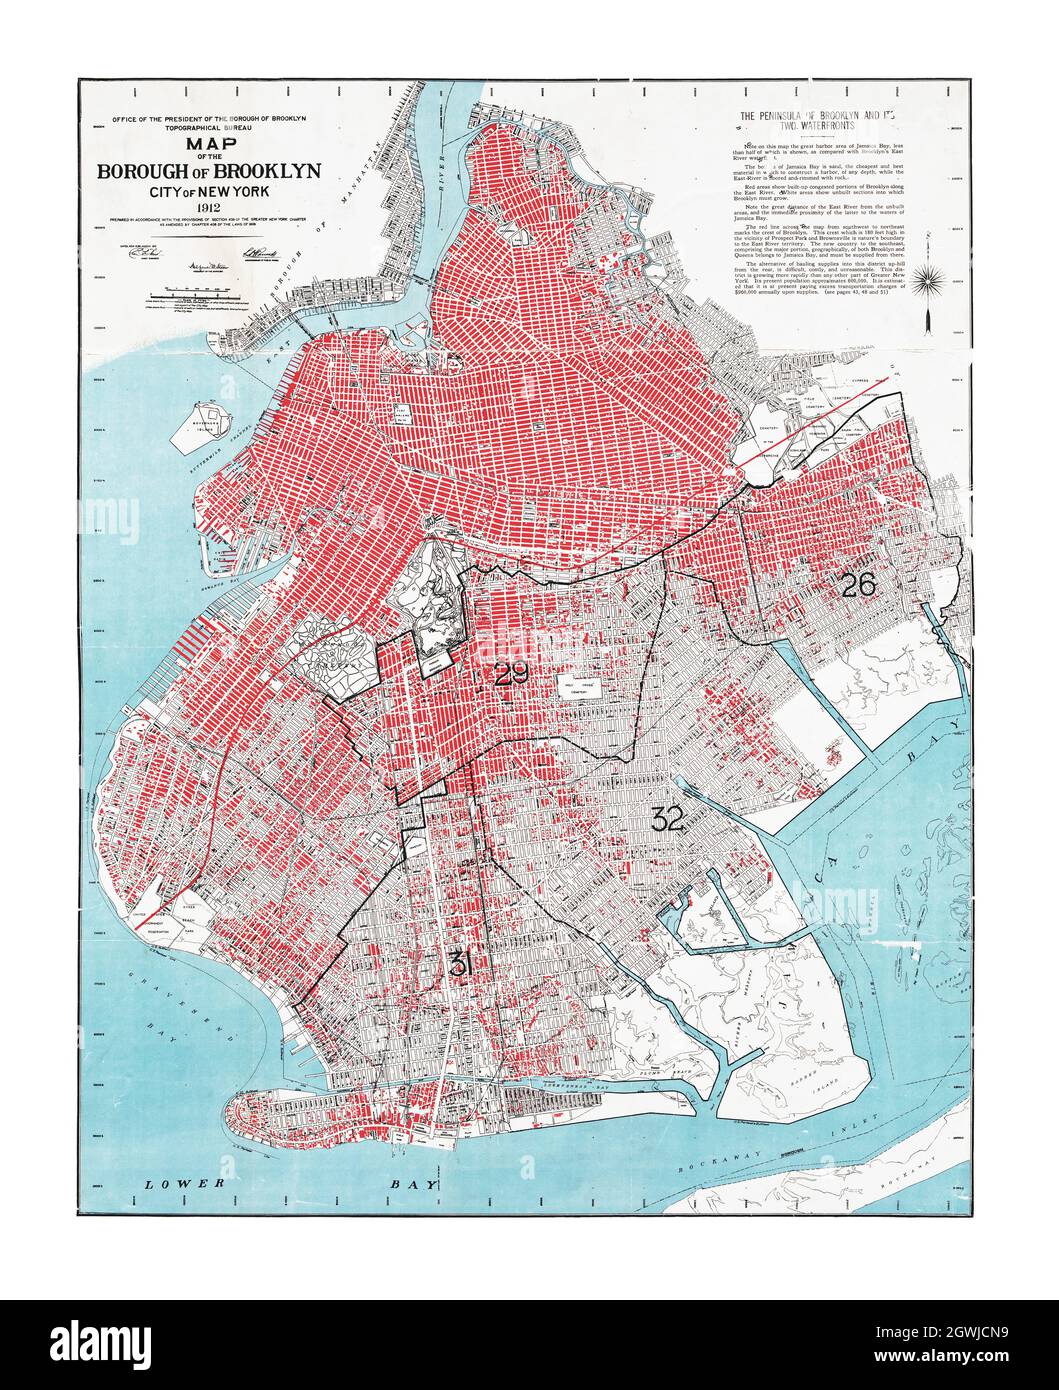 Map of The Borough of Brooklyn, City of New York, 1912 Stock Photo